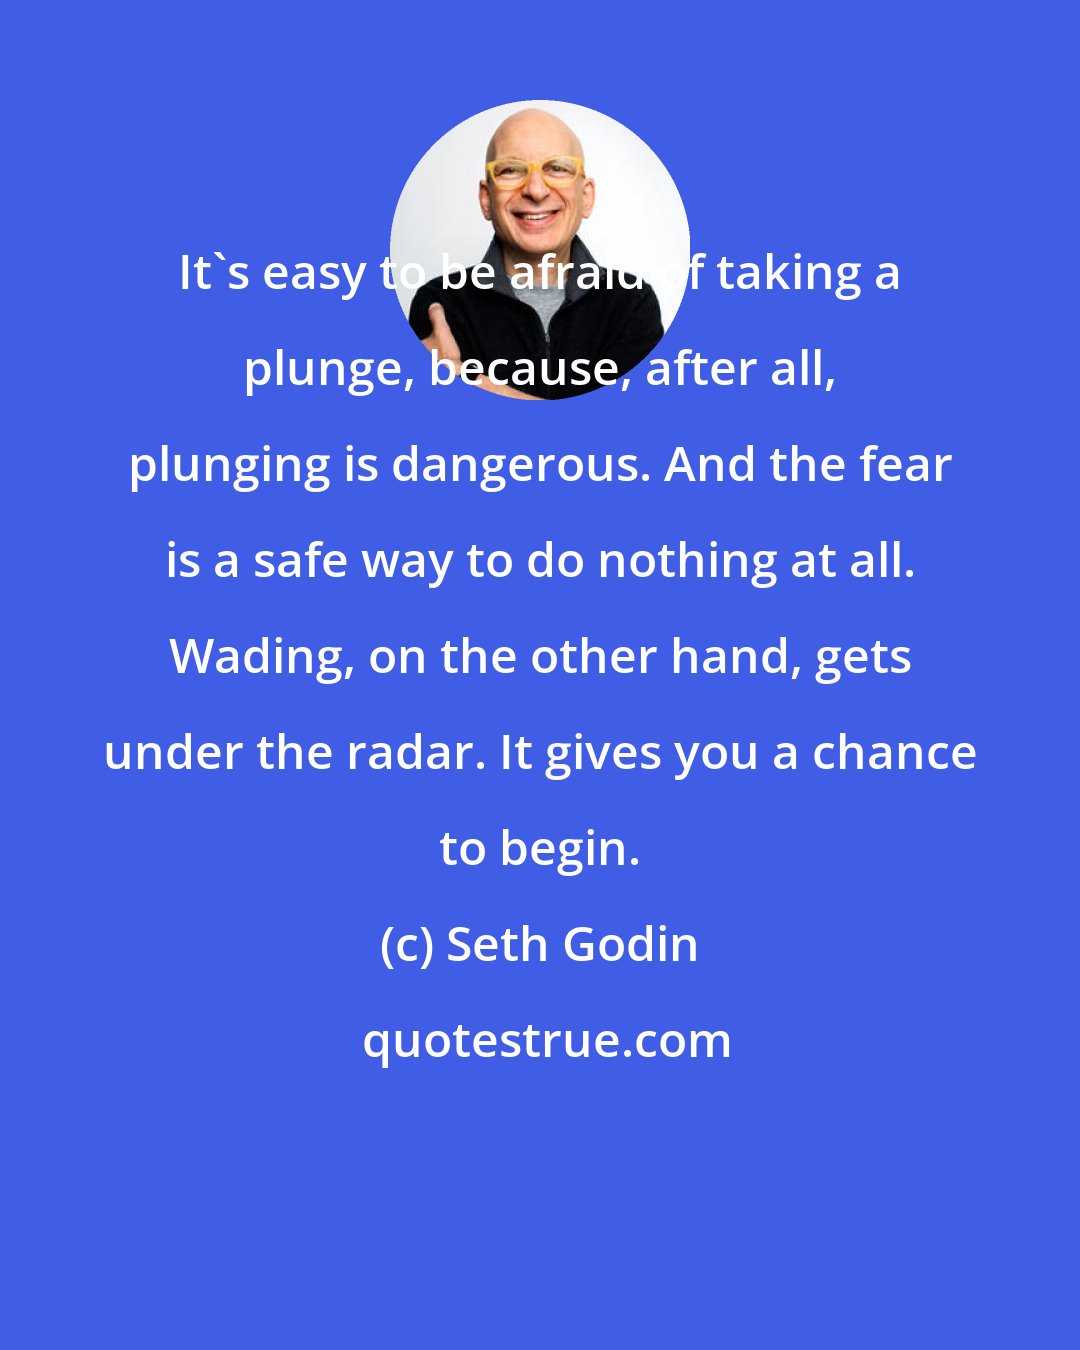 Seth Godin: It's easy to be afraid of taking a plunge, because, after all, plunging is dangerous. And the fear is a safe way to do nothing at all. Wading, on the other hand, gets under the radar. It gives you a chance to begin.